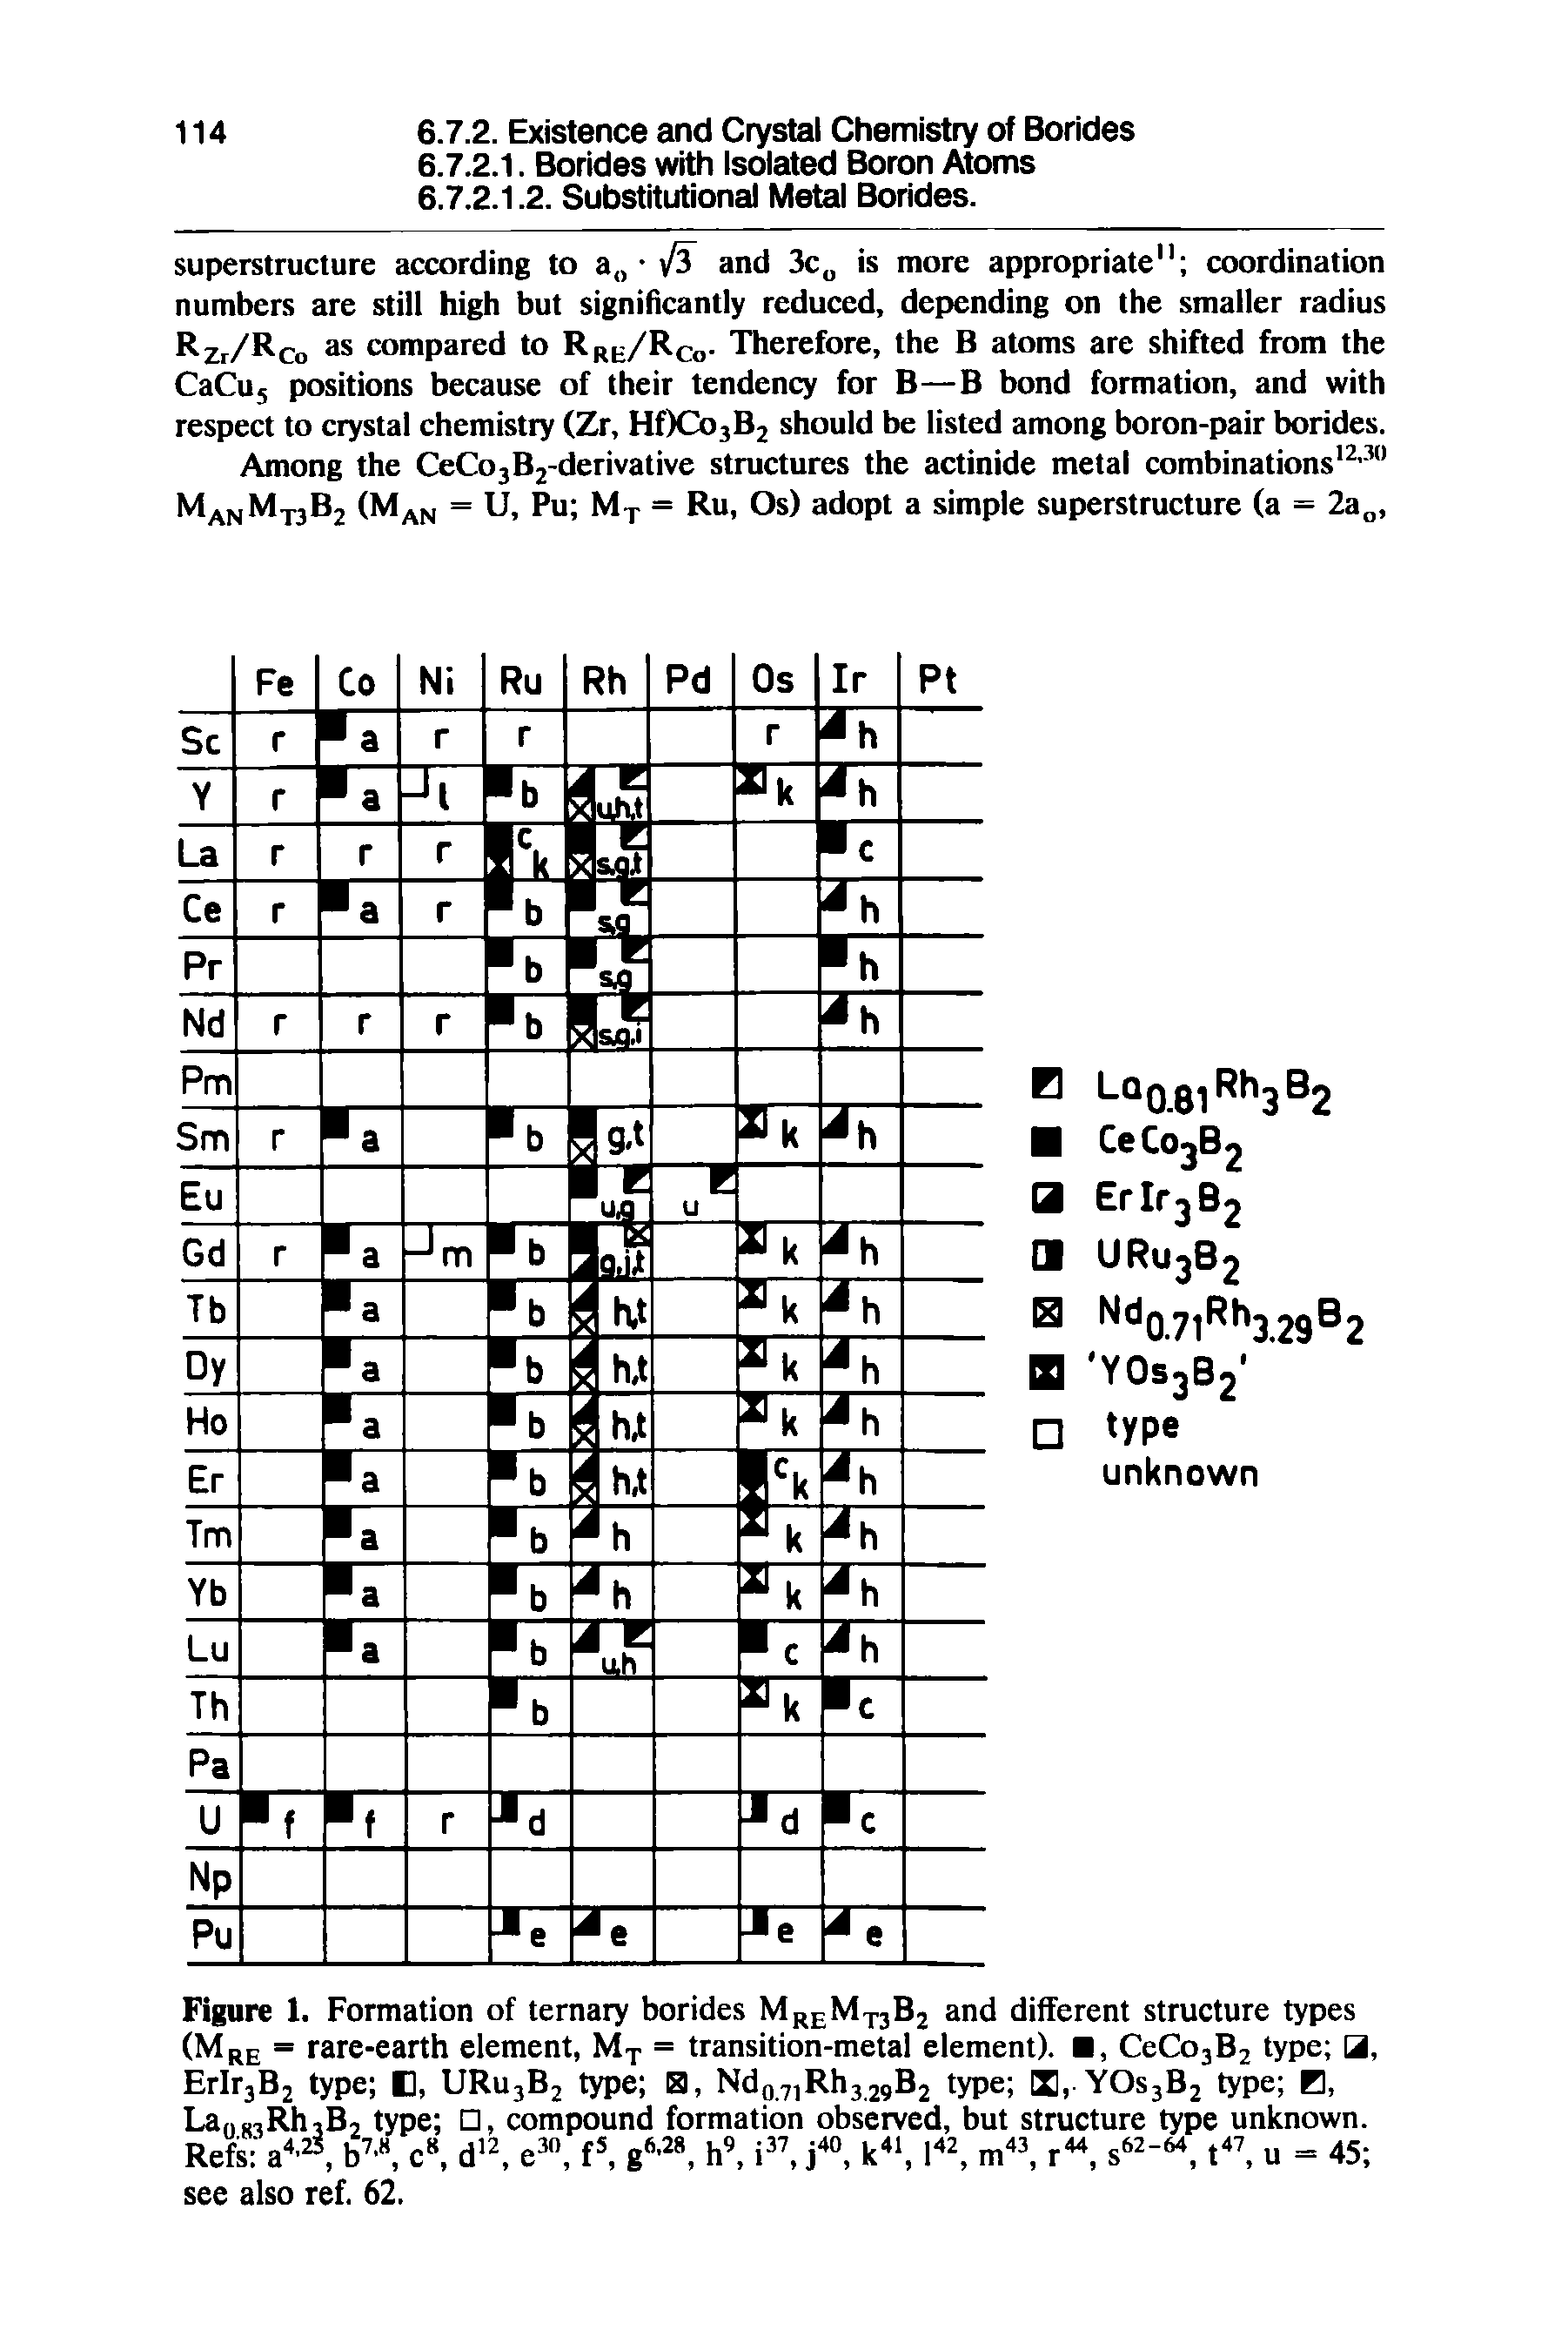 Figure 1. Formation of ternary borides MreMj3B2 and different structure types (Mre = rare-earth element, M-p = transition-metal element). , CeCo3B2 type ErIr3B2 type O, URujBj type El, Ndo7,Rh3 29B2 type IS, YOS3B2 type B, Laofi3Rh3B2 type , compound formation observed, but structure type unknown. Refs a , b , c , d e , f g , h , i , j ", k , 1 , m , r, s - , t u = 45 see also ref. 62.